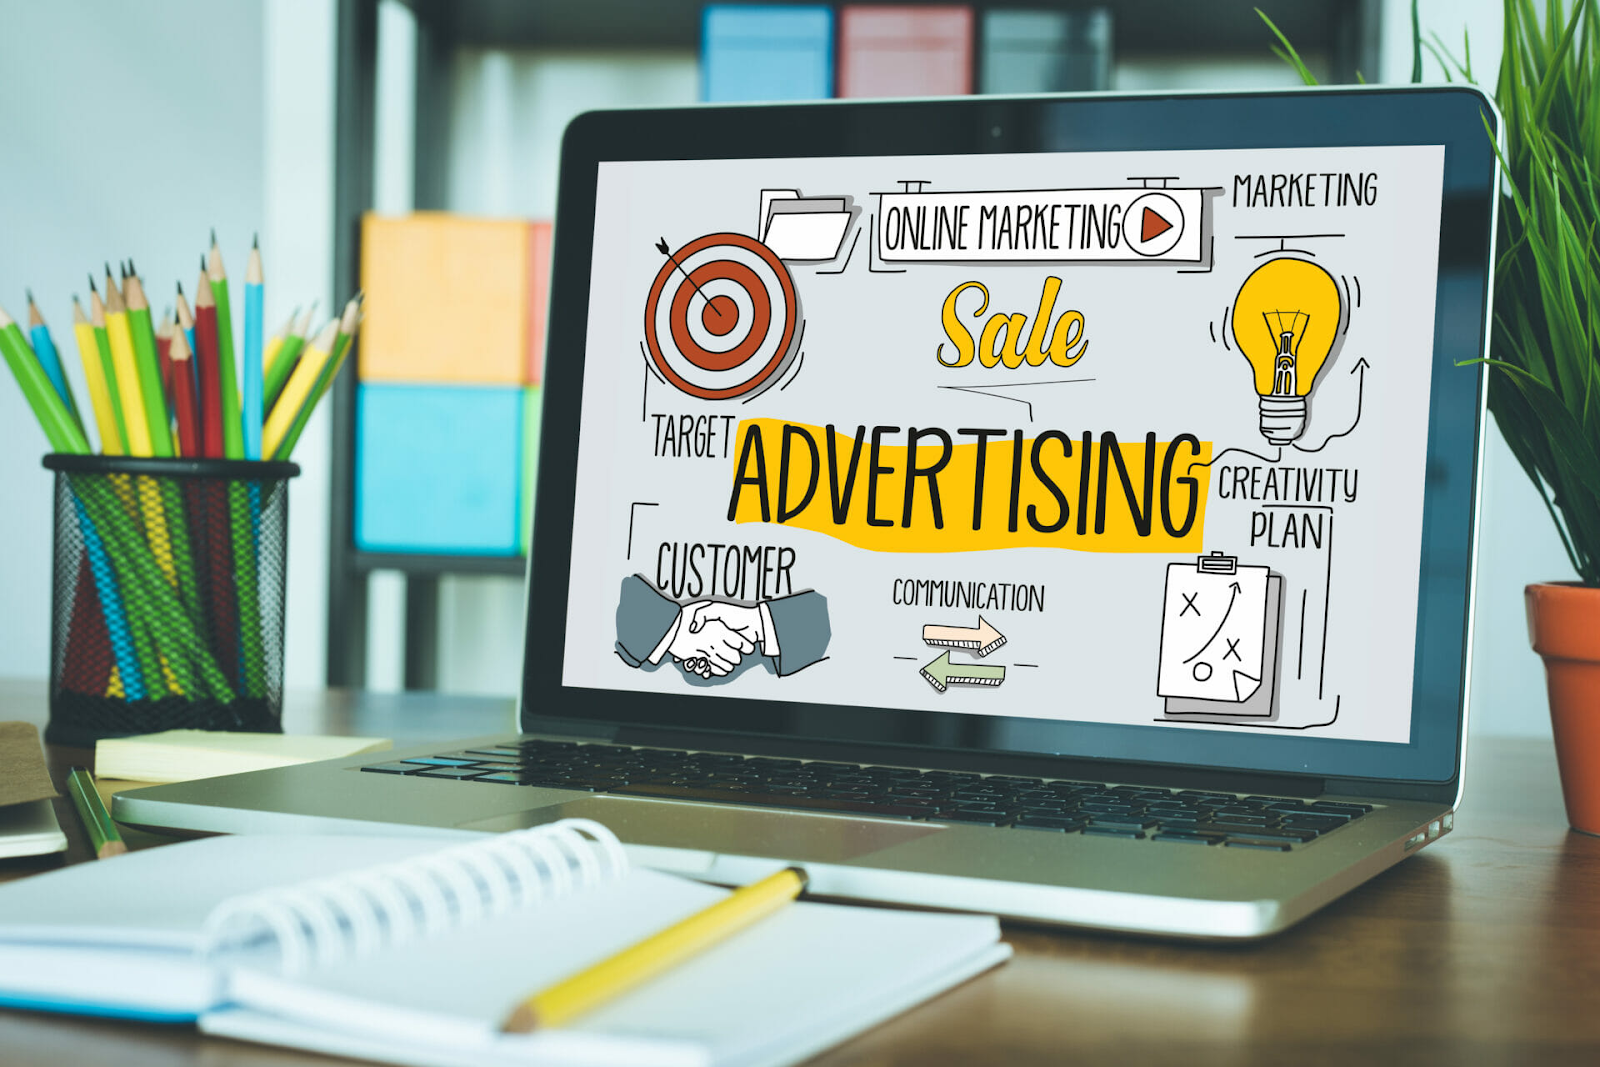 Use targeted paid advertisements